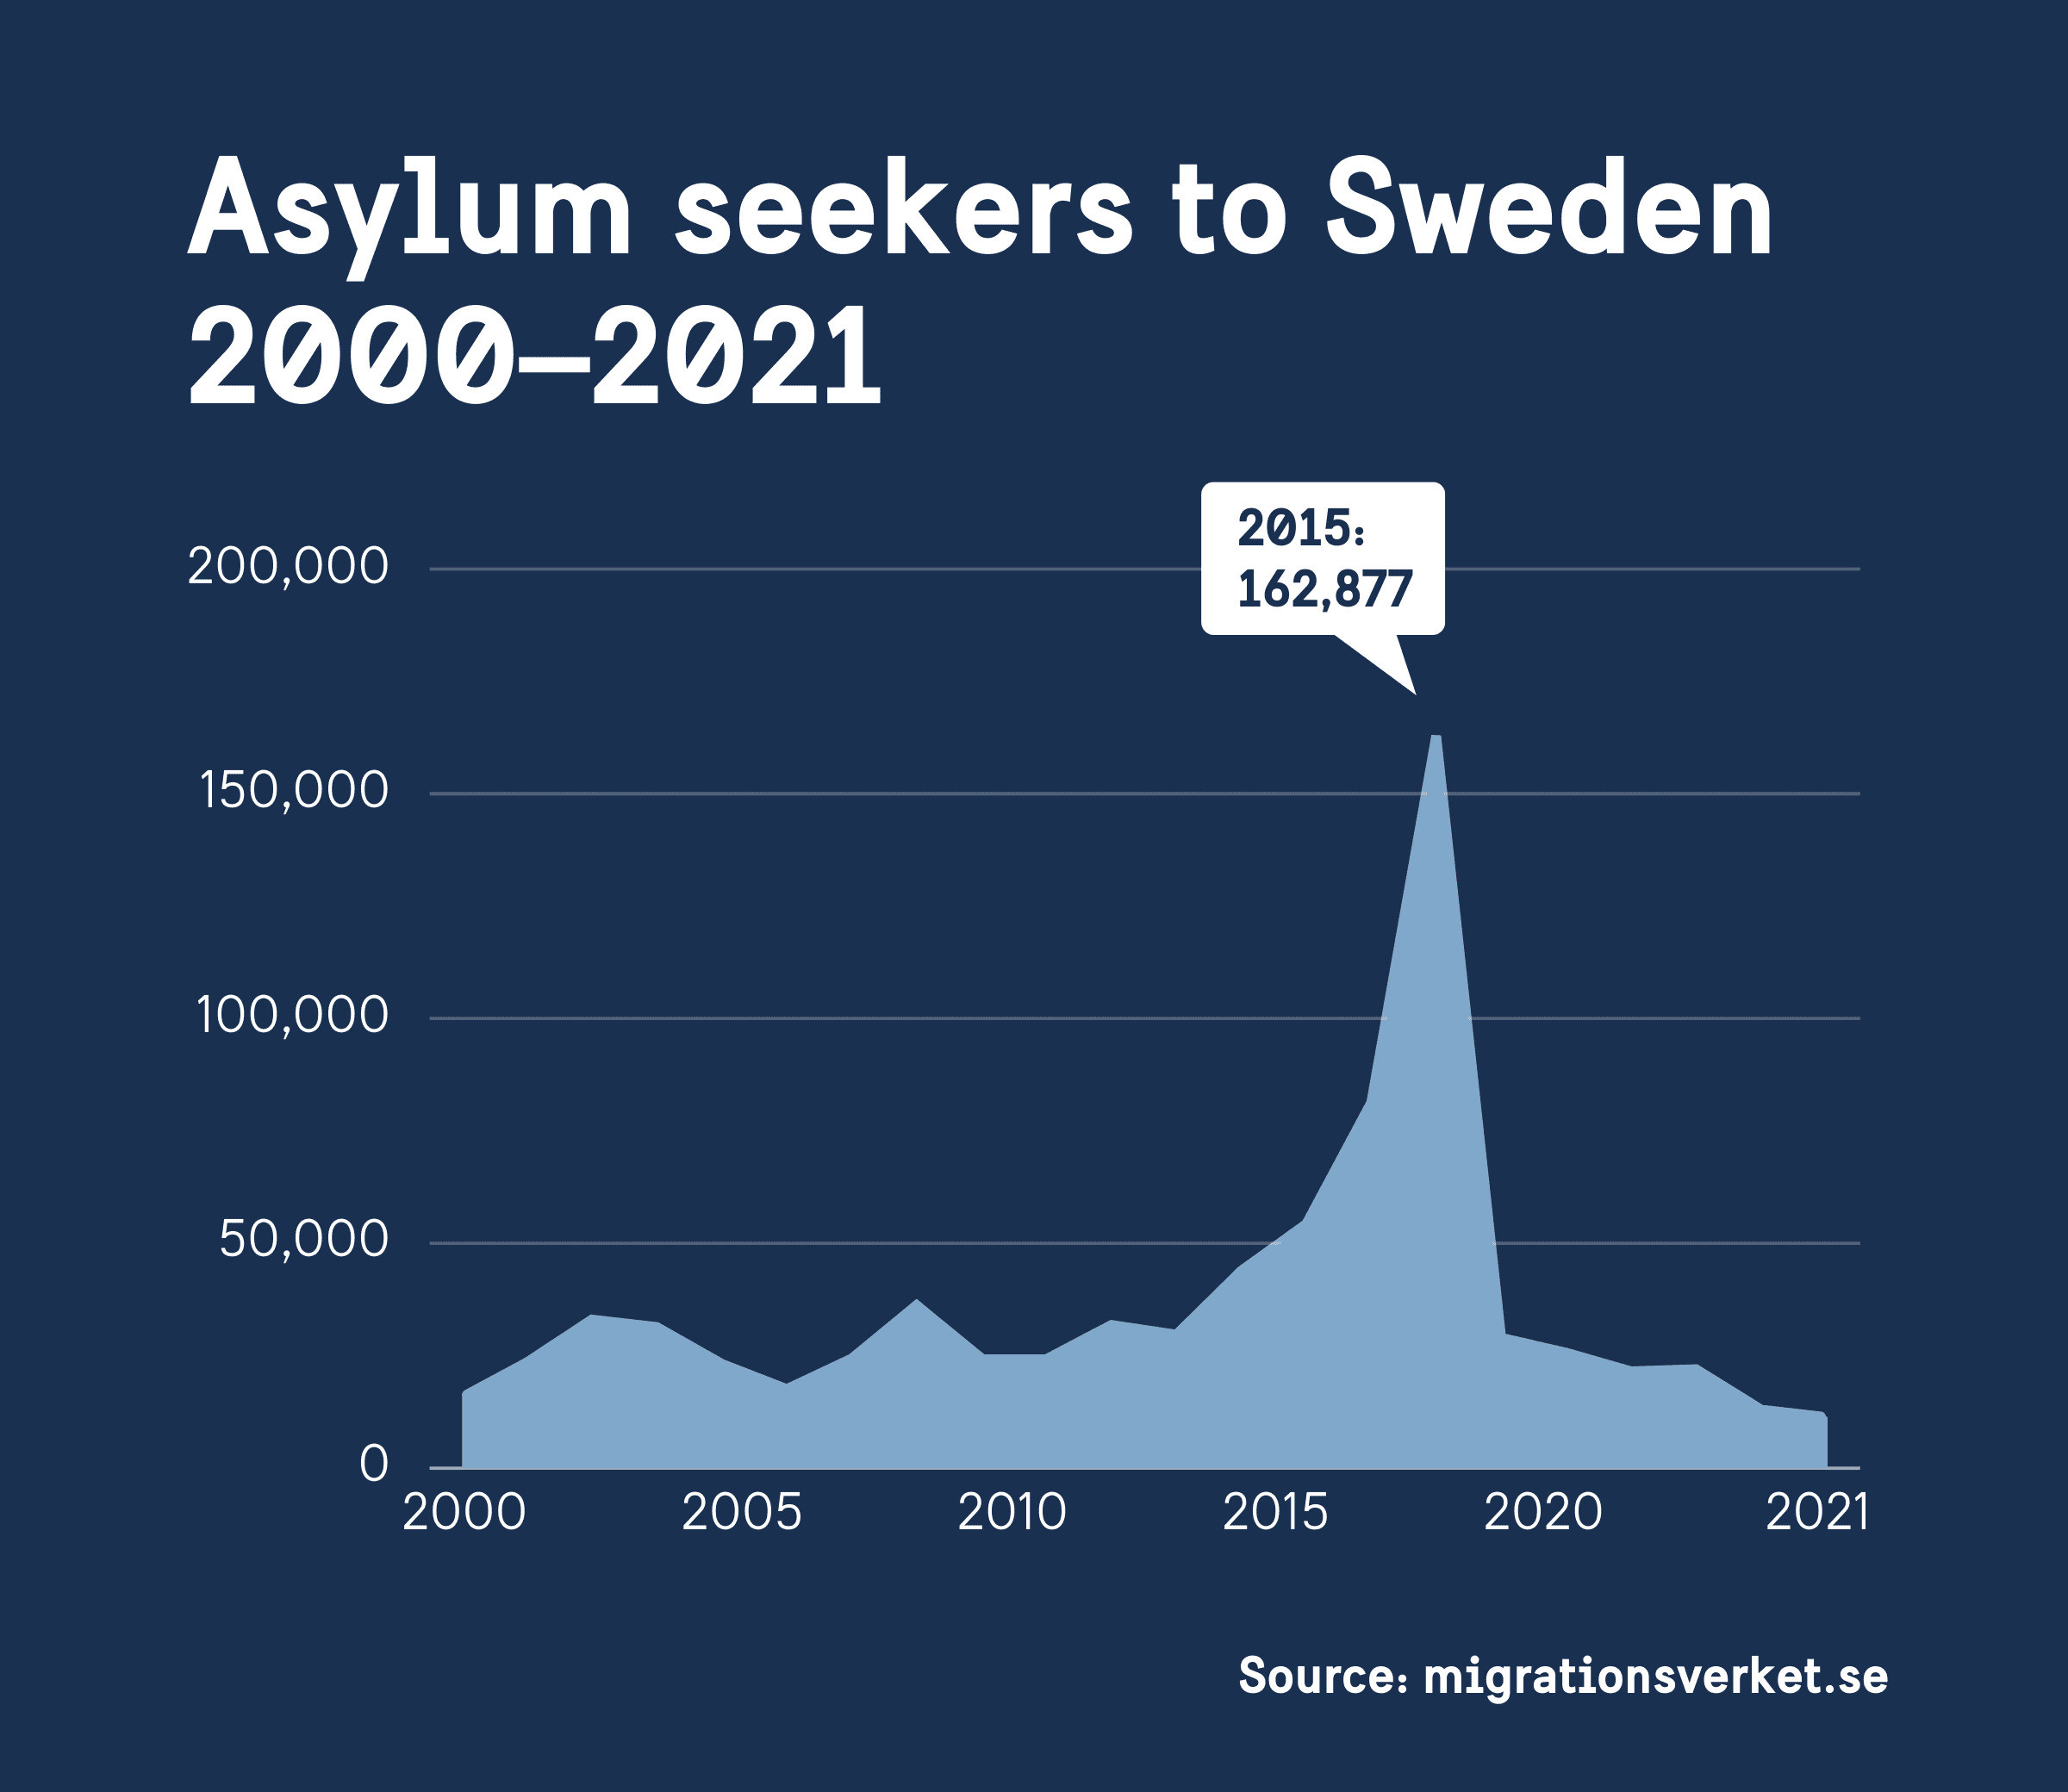 Chart showing the number of asylum seekers to Sweden 2000–2021.